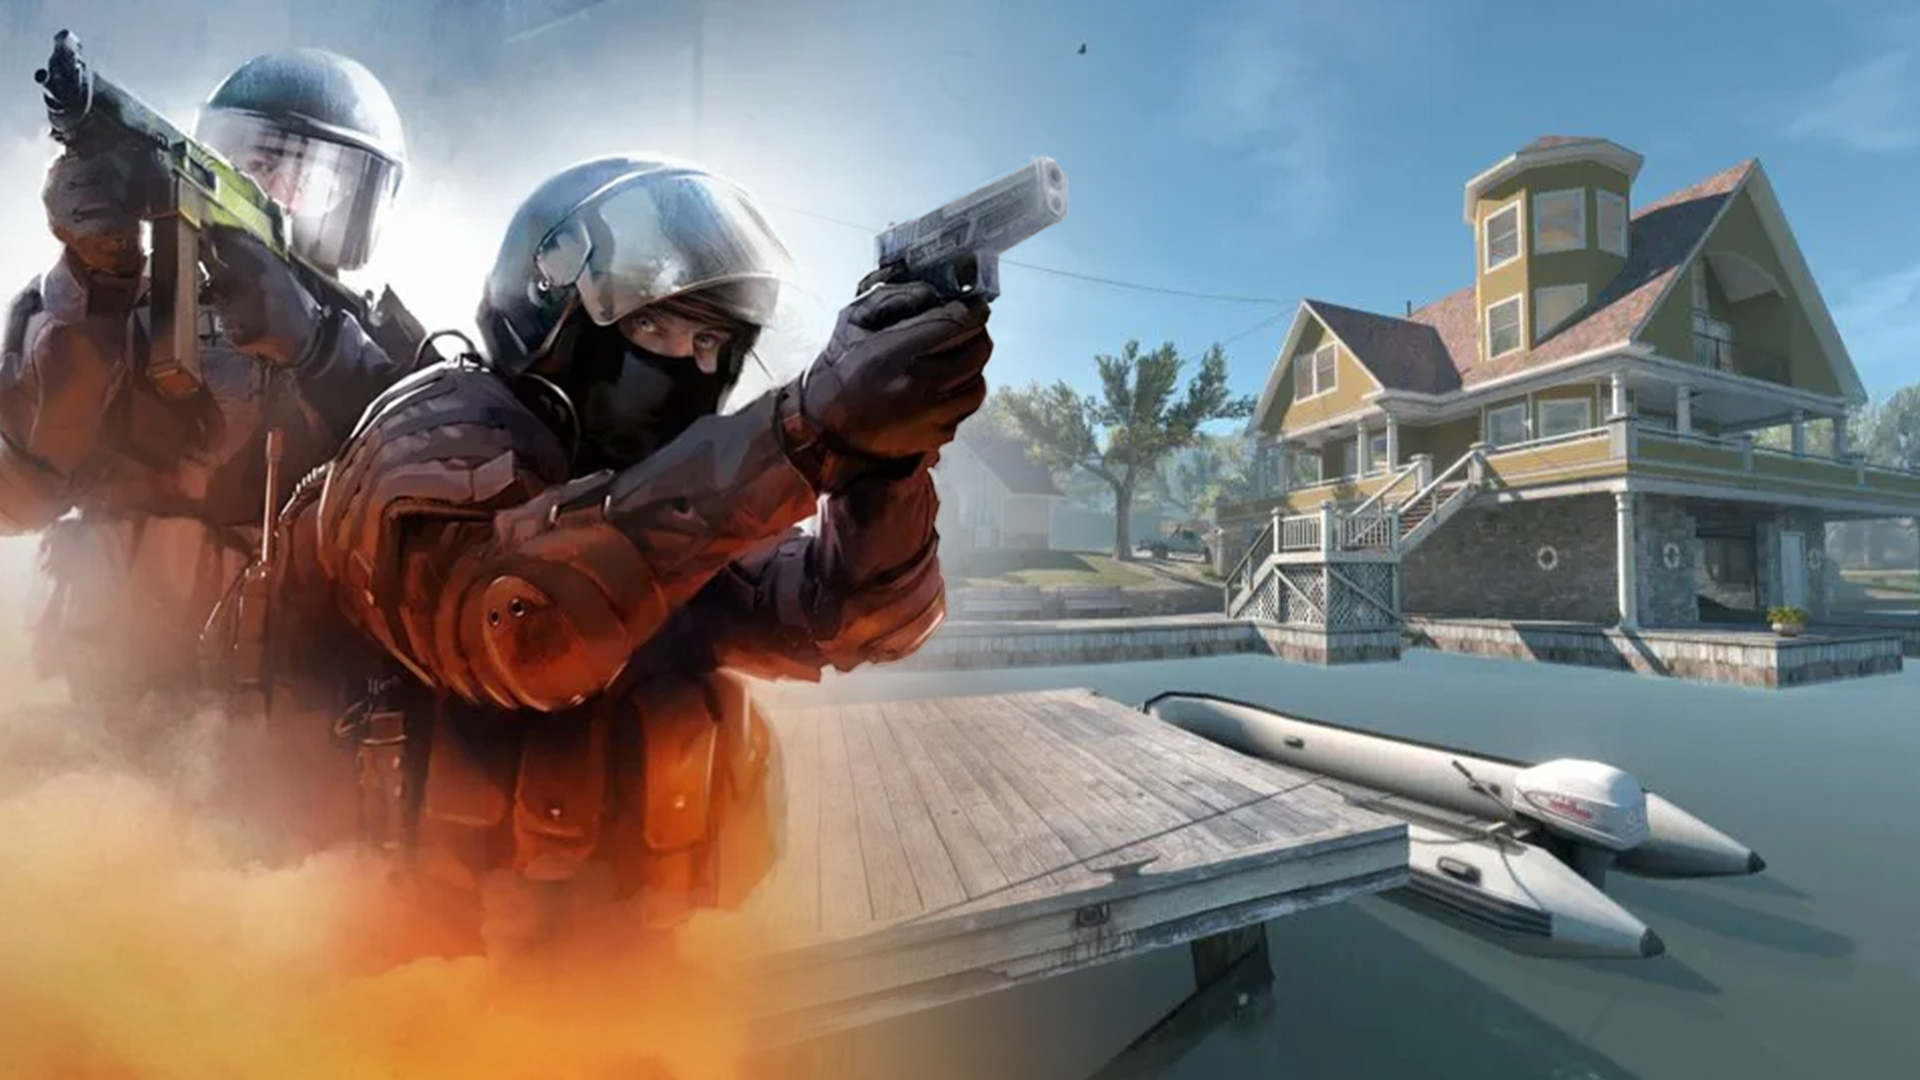 Valve drops huge Counter-Strike 2 patch and it's not even out yet